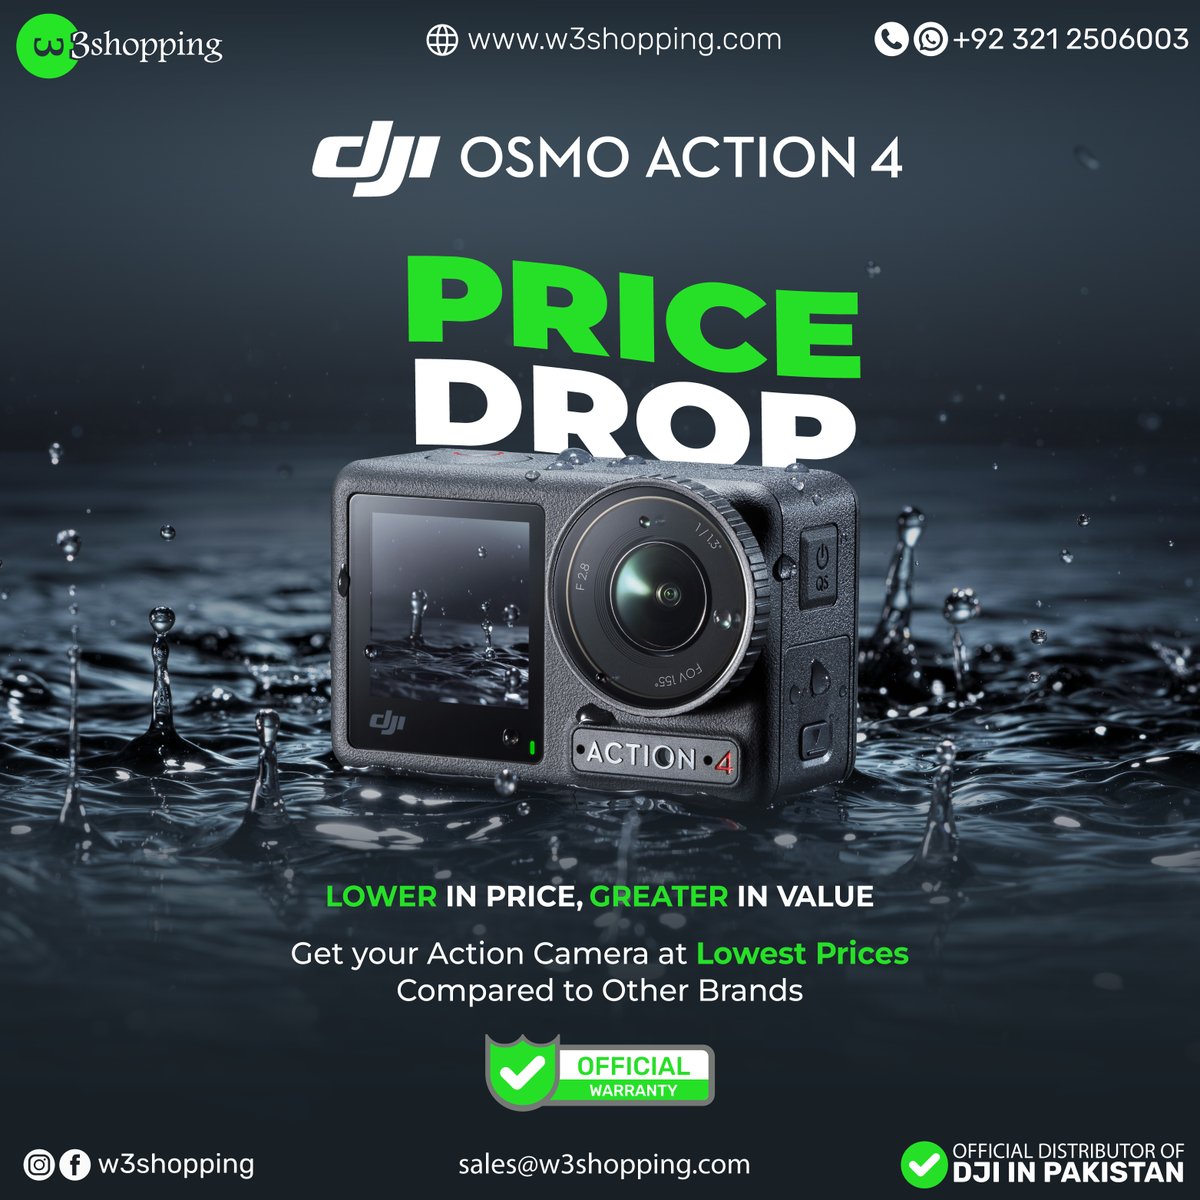 📸 Prices Drop! 📸
Capture every moment with the DJI Osmo Action 4! 🌟
Get yours now at the lowest prices compared to other brands. 🎉

#PricesDrop #DJI #OsmoAction4 #ActionCamera #LowestPrices #GreatValue #CaptureEveryMoment #Photography #Adventure #LimitedOffer #WhatsApp